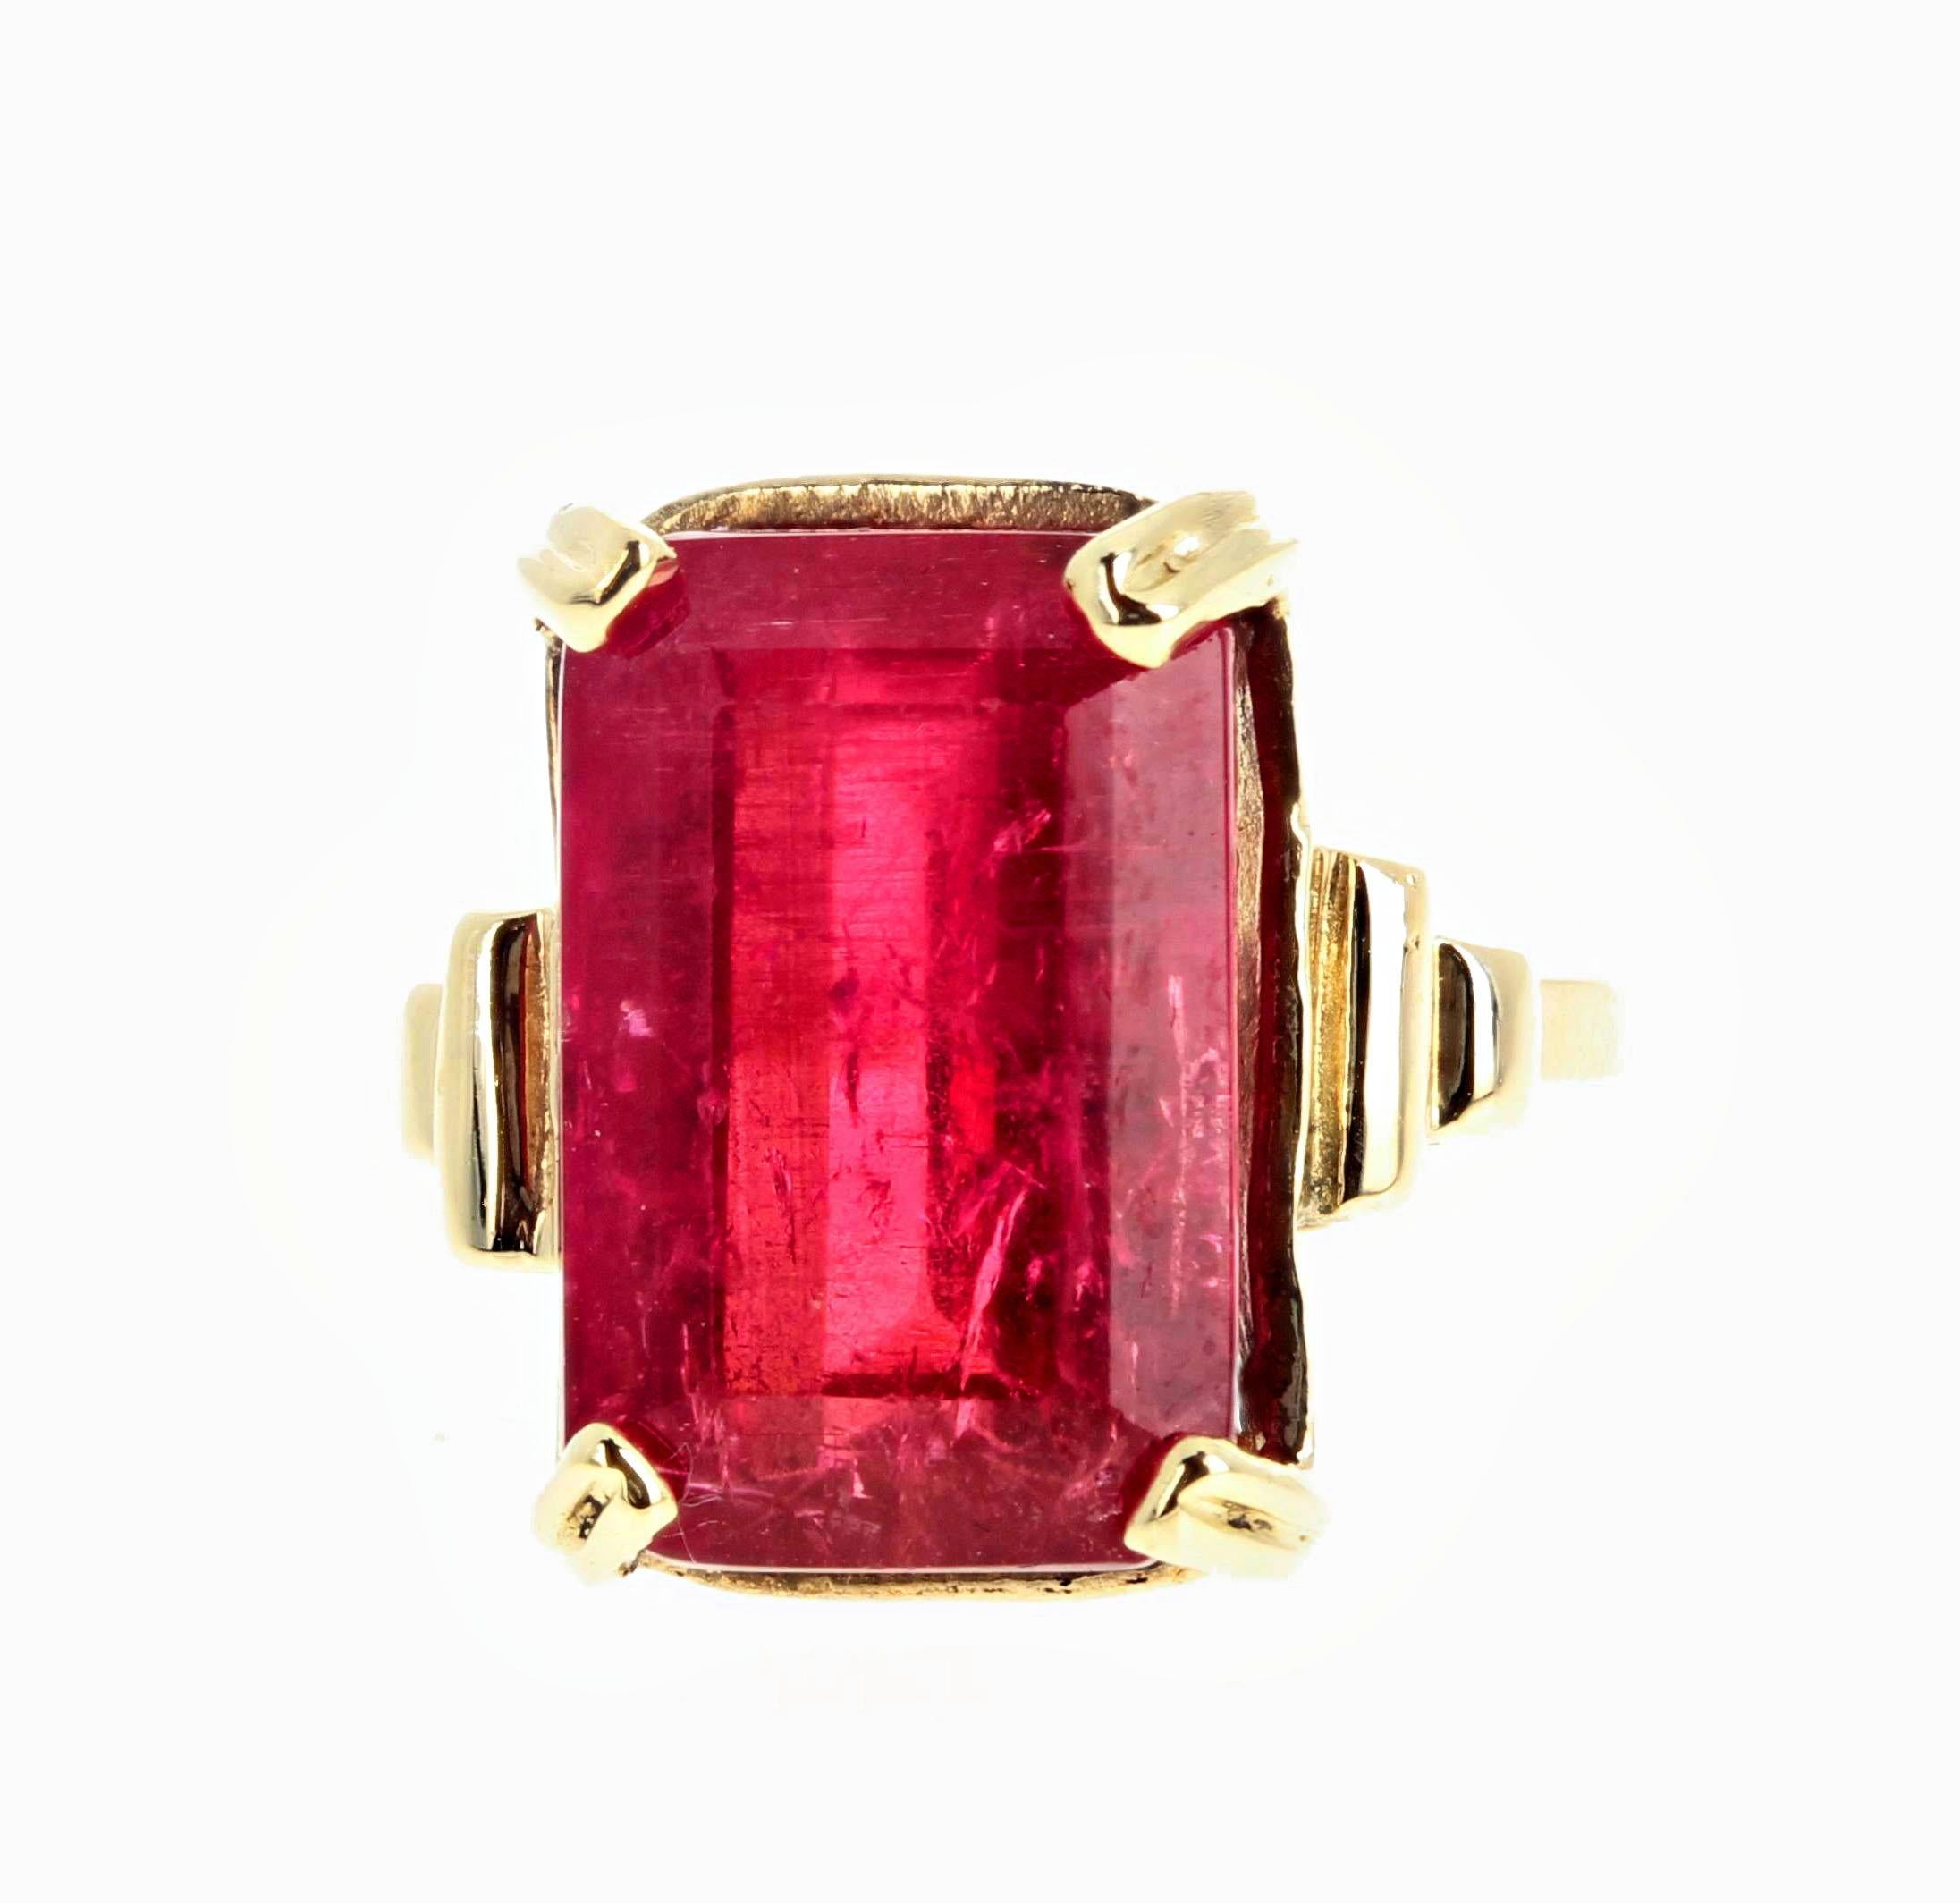 Cushion Cut AJD Intensely Glowing 8.5Cts Red Real Tourmaline Gold Ring